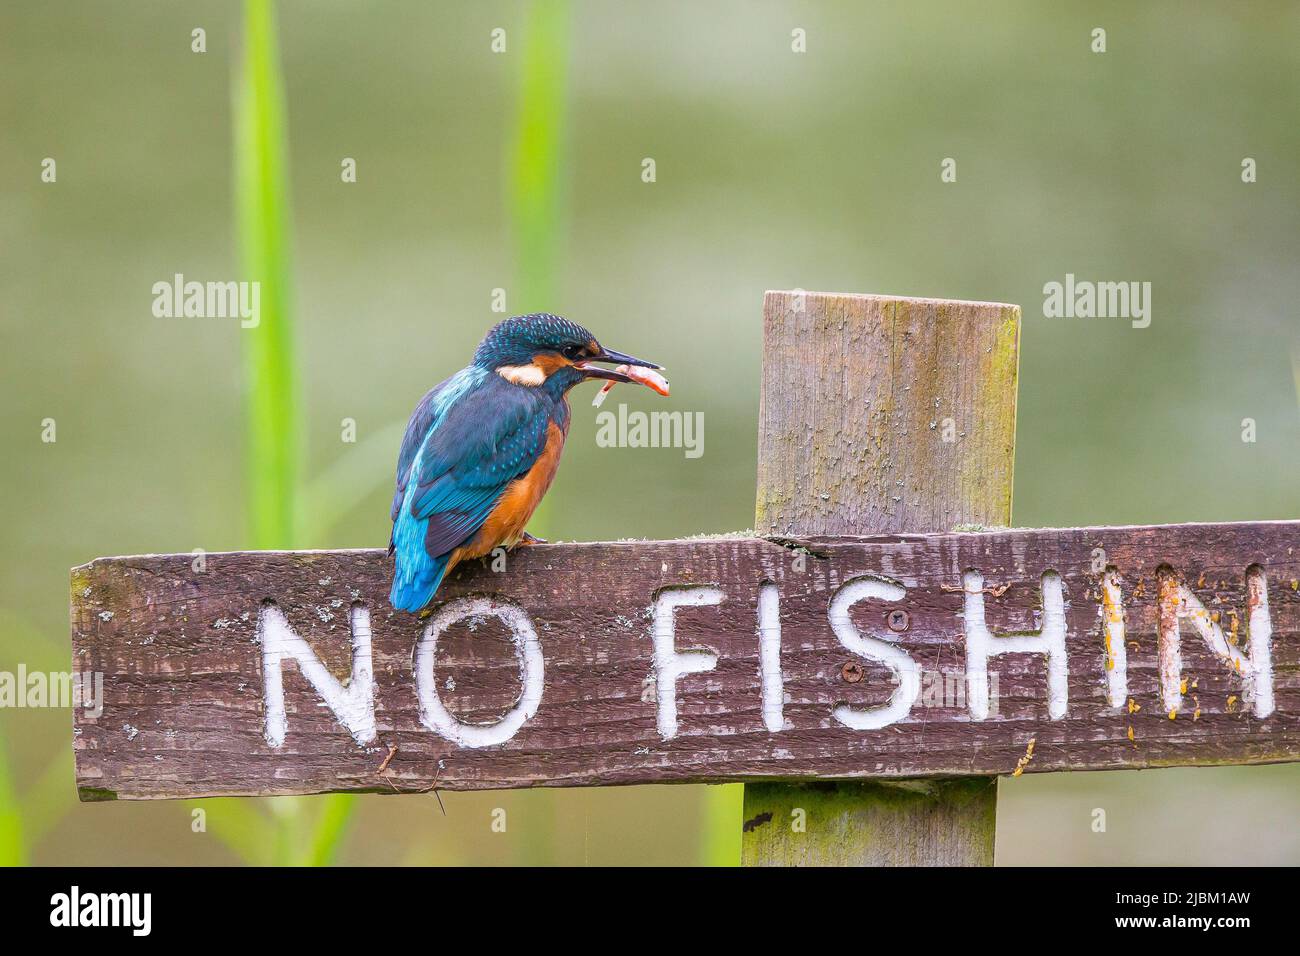 Kidderminster, UK. 7th June. 2022. UK weather: with very light cloud and sunny spells and temperatures reaching 20 degrees, today is a perfect day for a spot of fishing. A kingfisher bird plays with a fish while perched on a 'no fishing' sign post before devouring his meal in one gulp. Credit: Lee Hudson/Alamy Live News Stock Photo